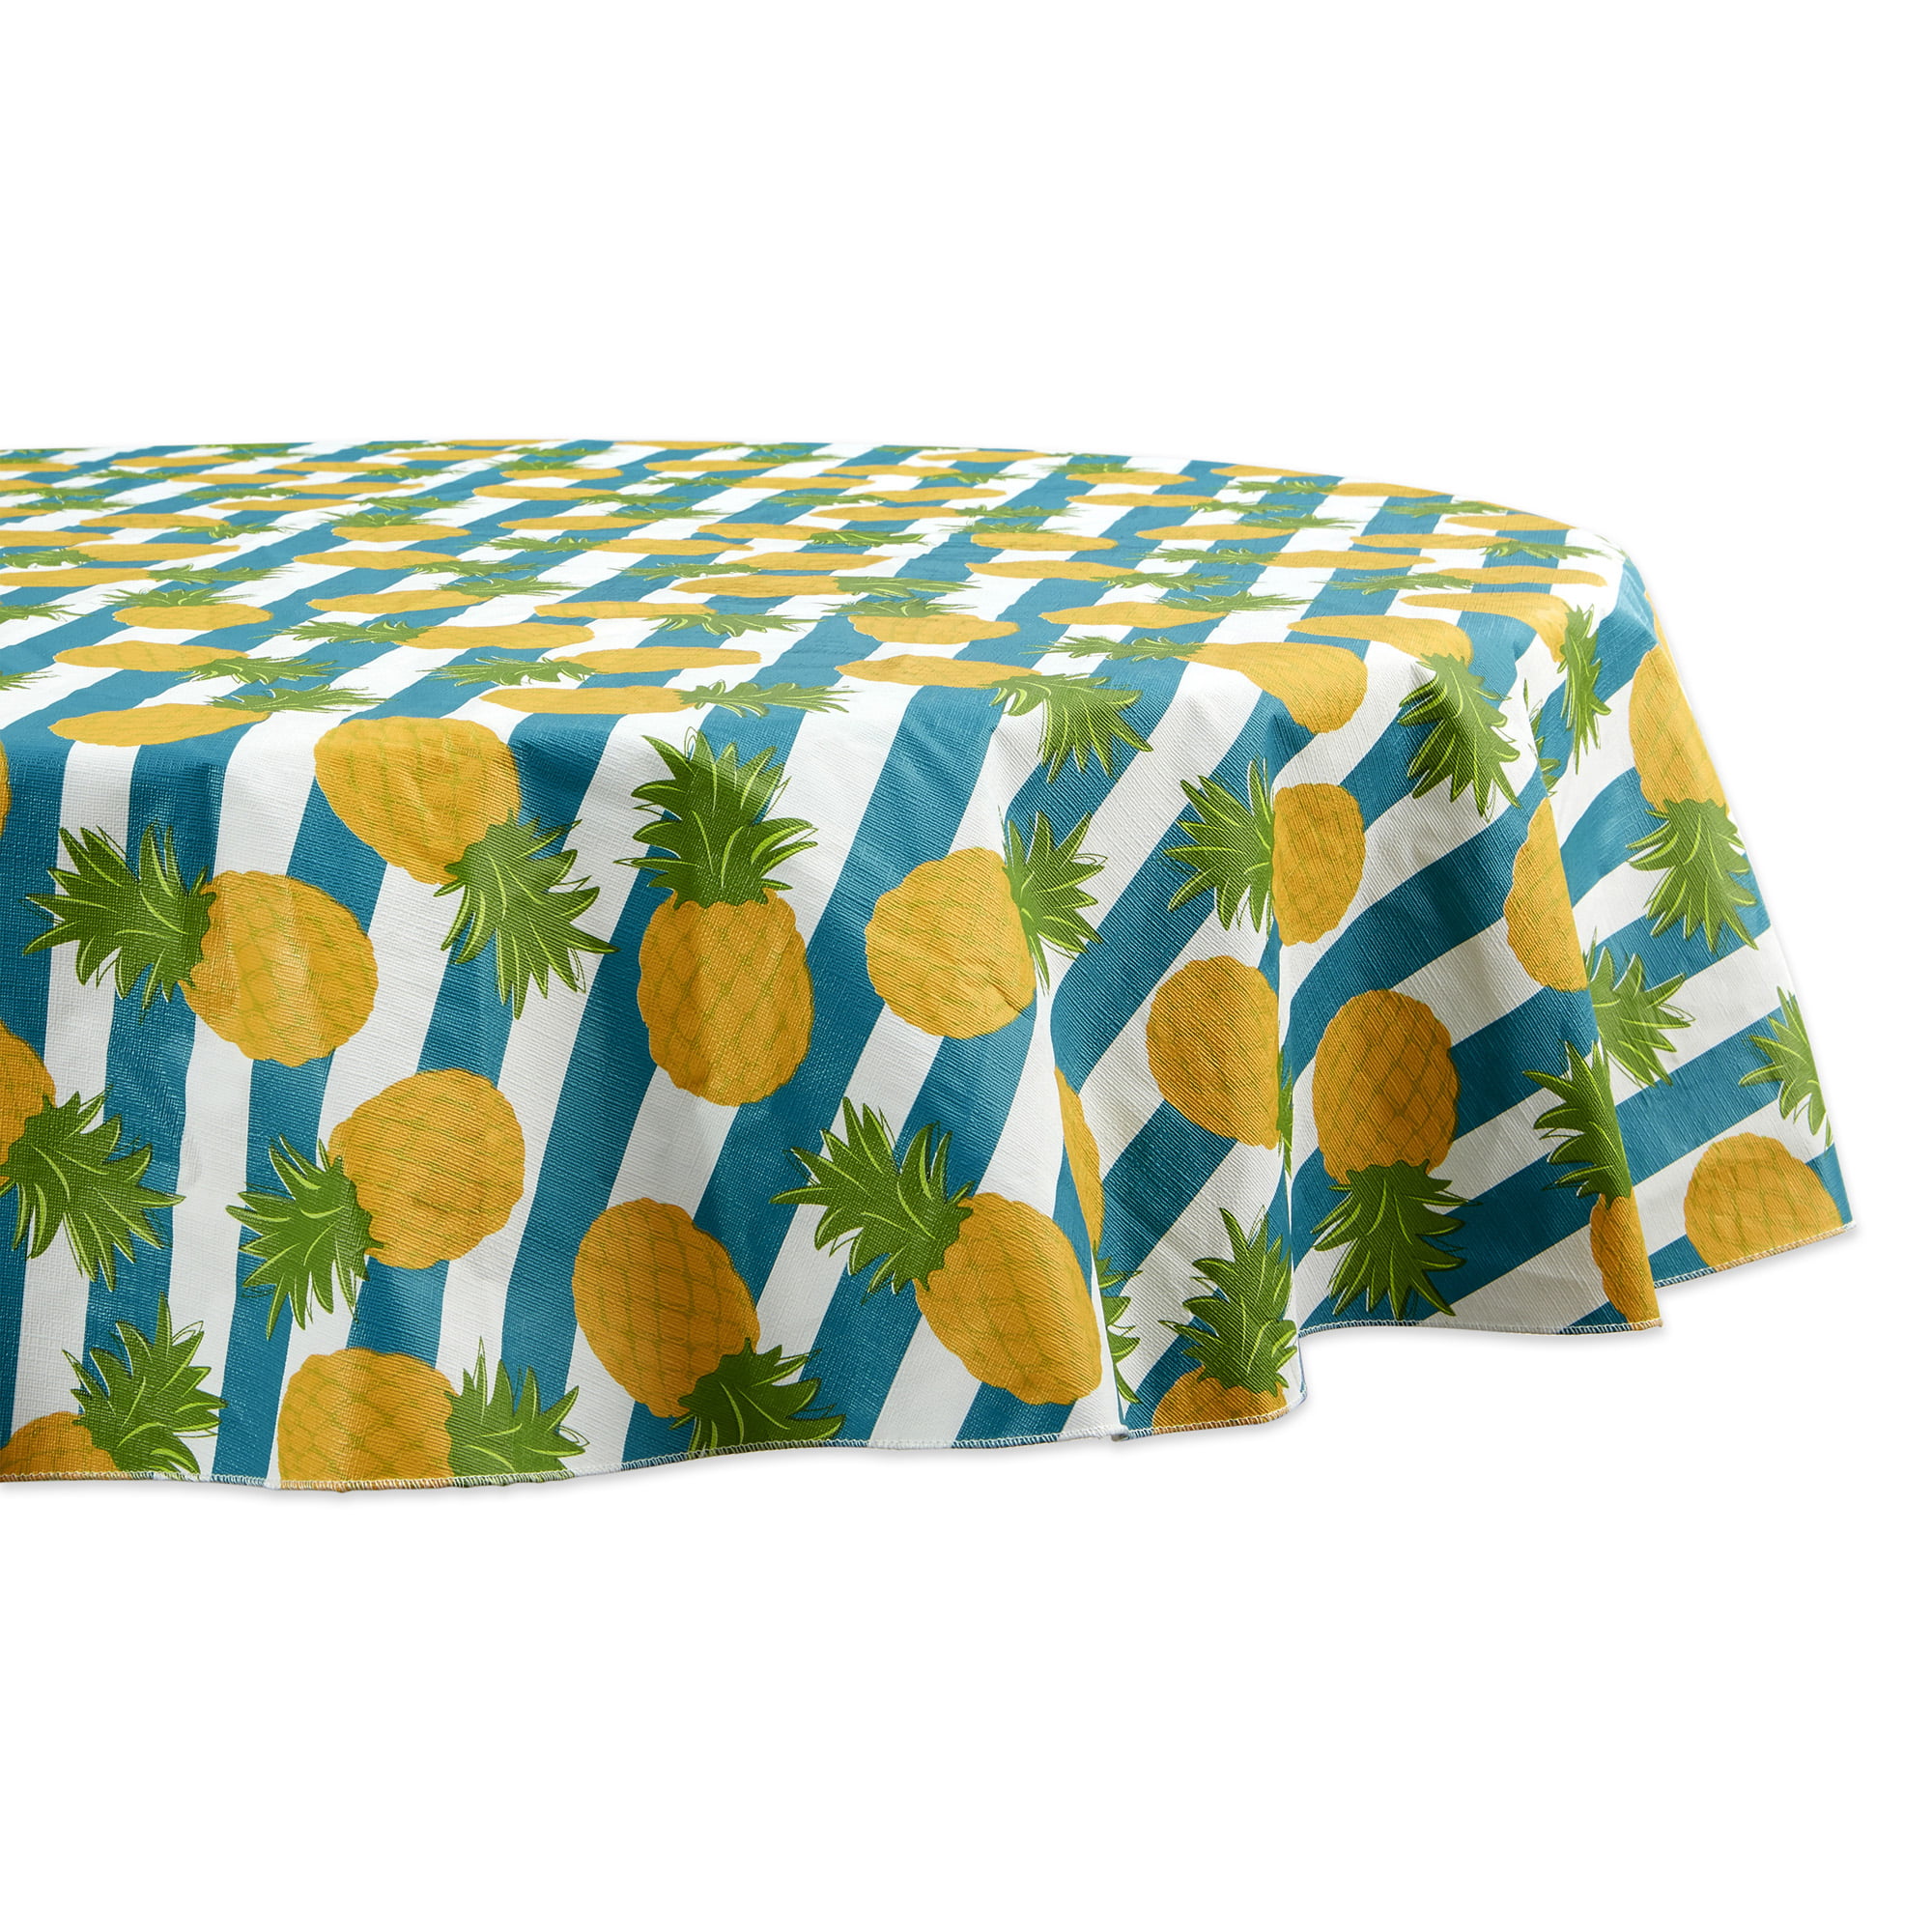 Summer Fun Vinyl Tablecloth PINEAPPLE Theme 52" Square 60" Round & Oblong 